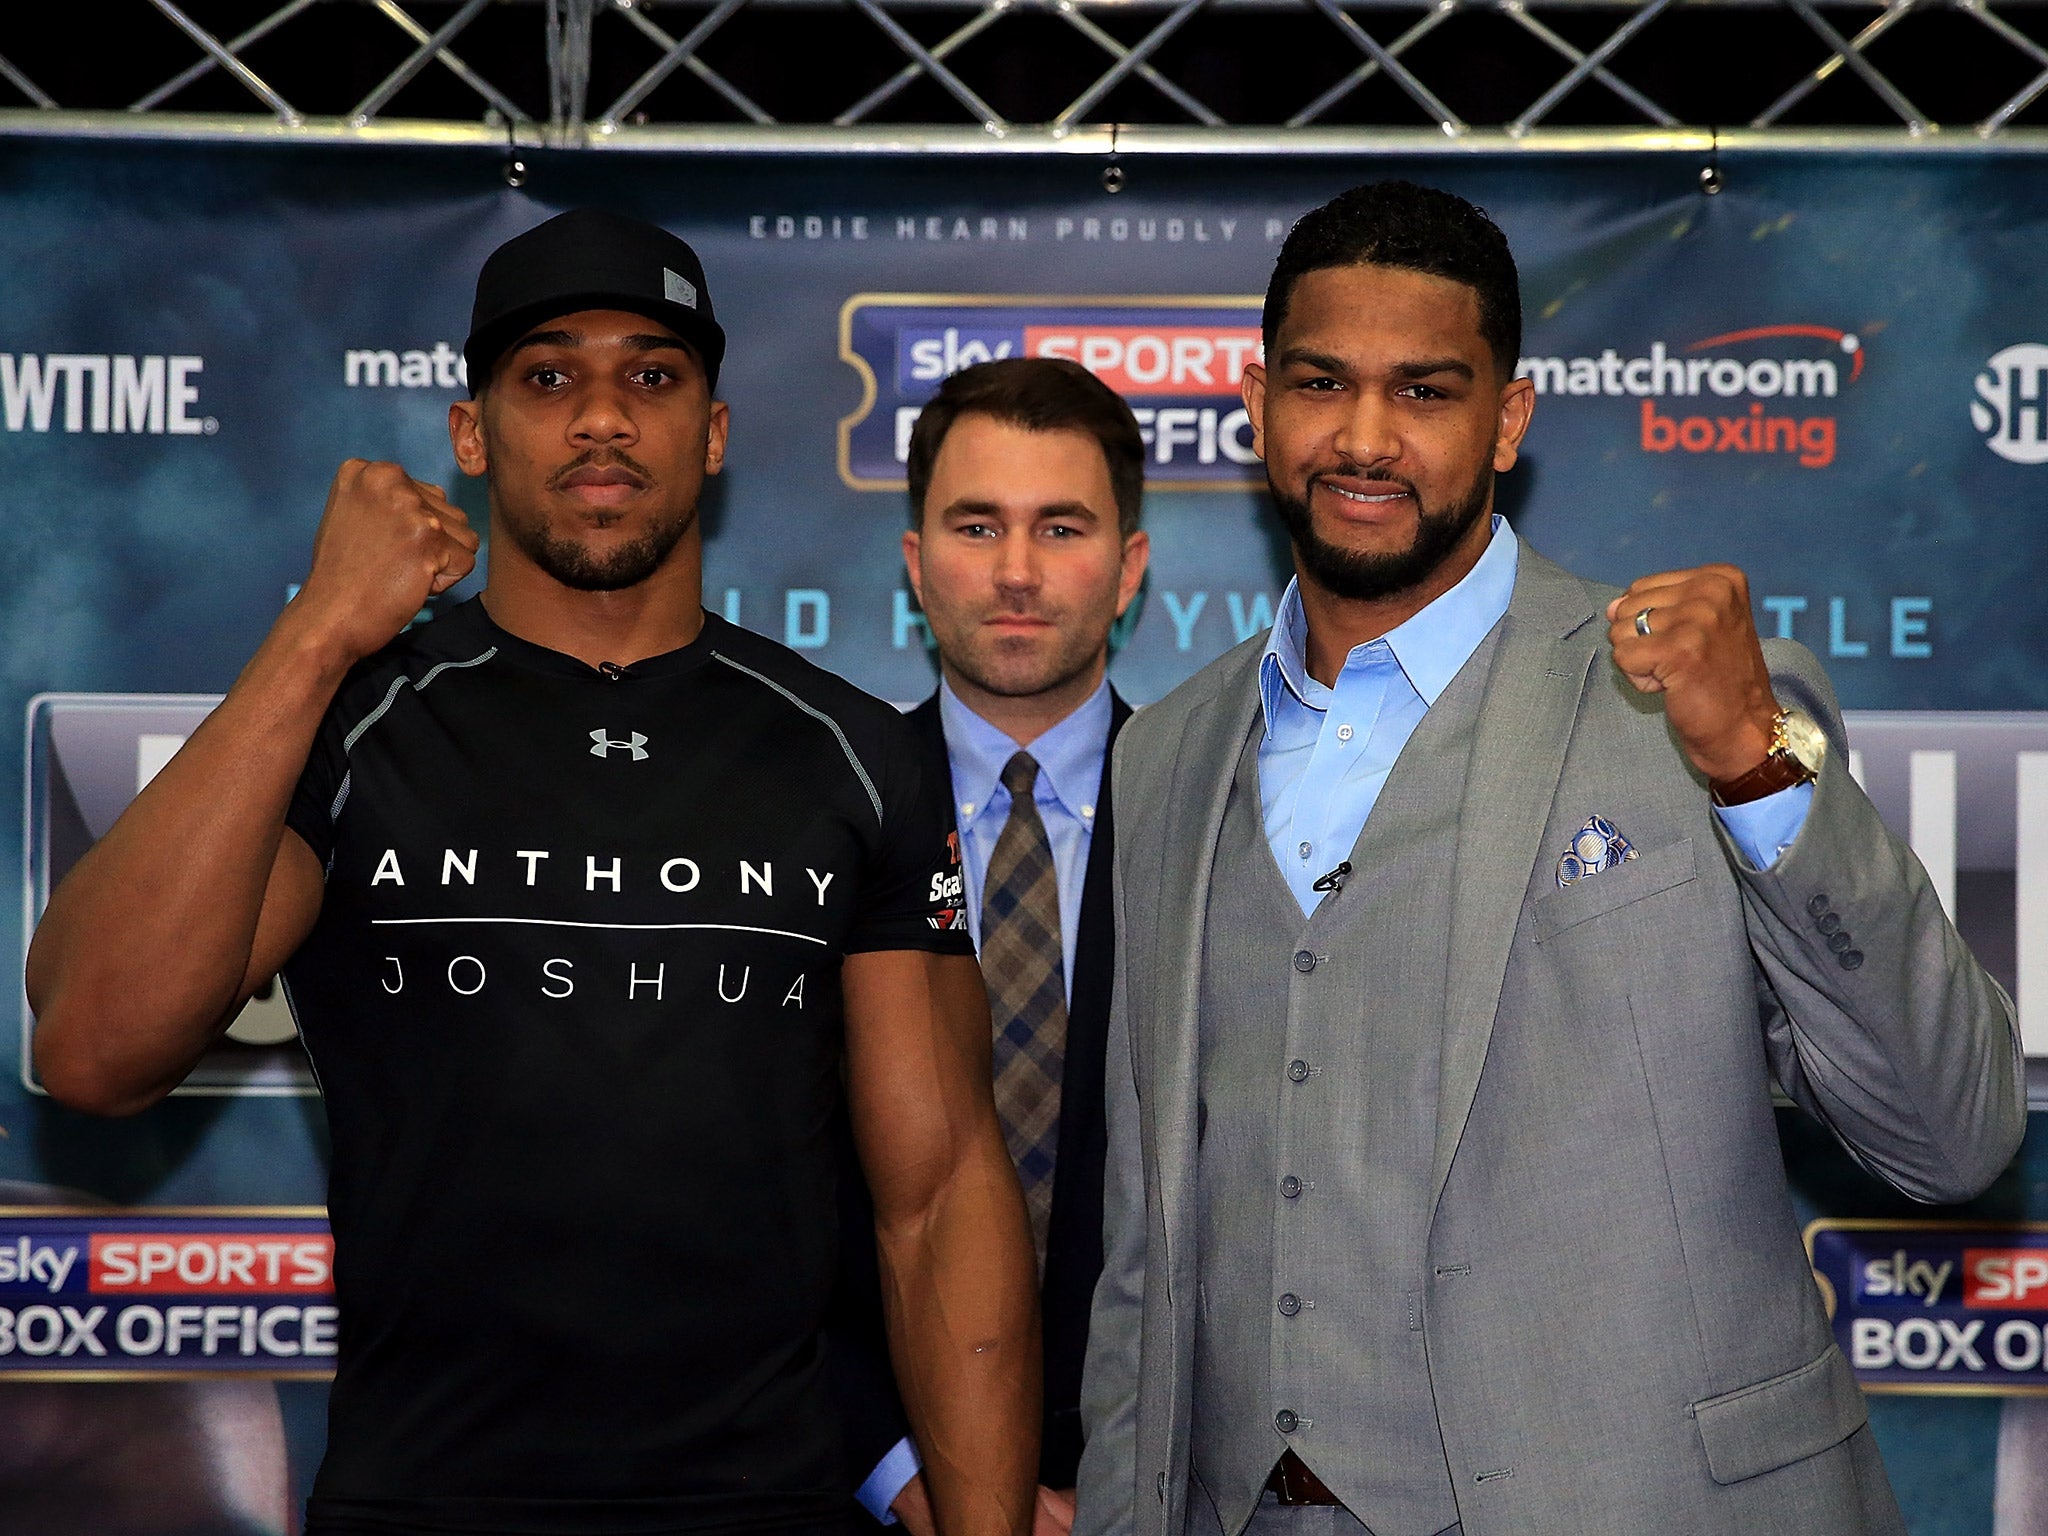 Anthony Joshua takes on Dominic Breazeale in this first defence of the IBF heavyweight title